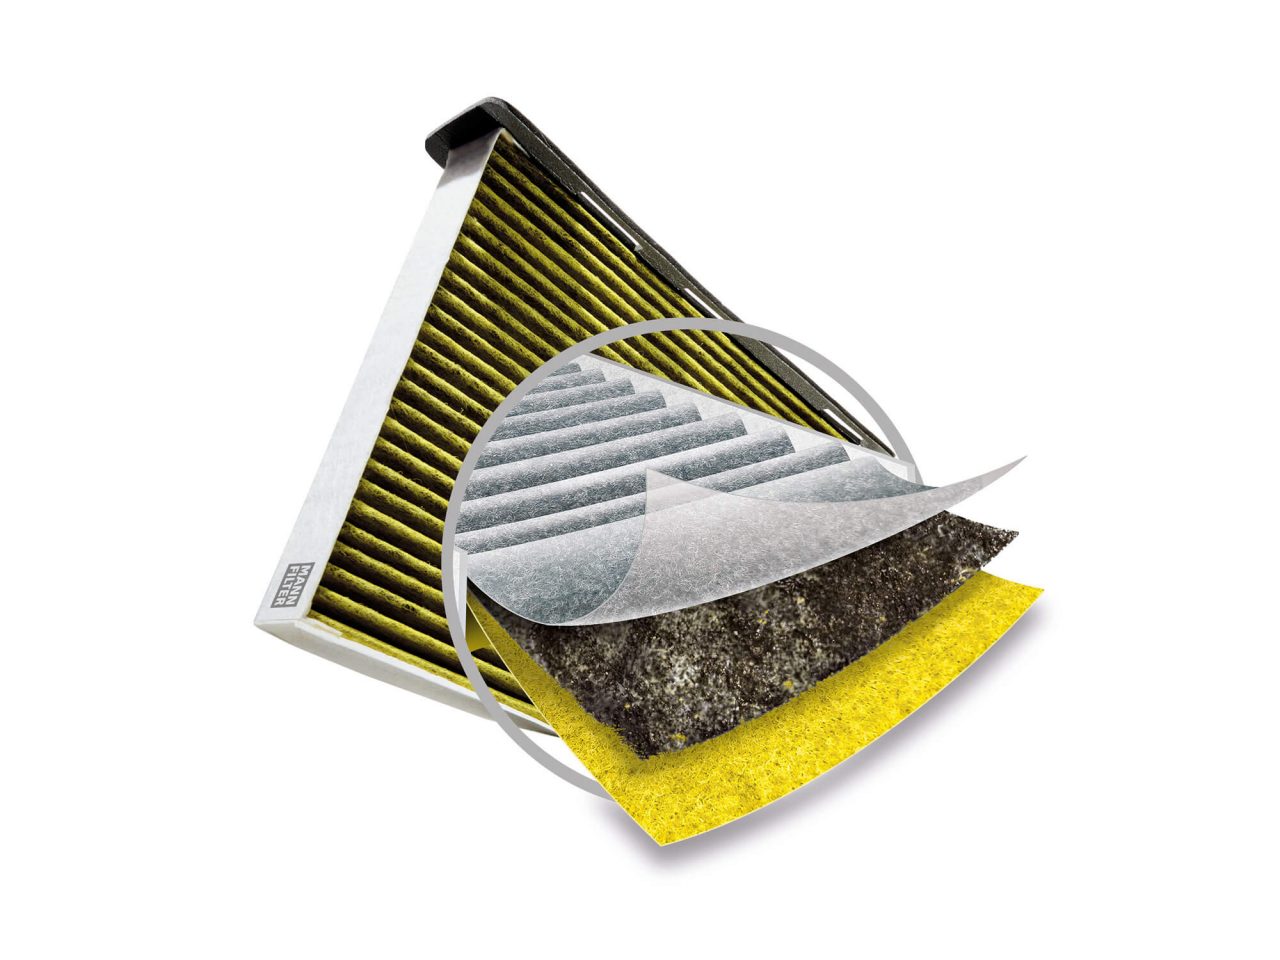 Cabin air filters and pollen filters for better air quality in the car